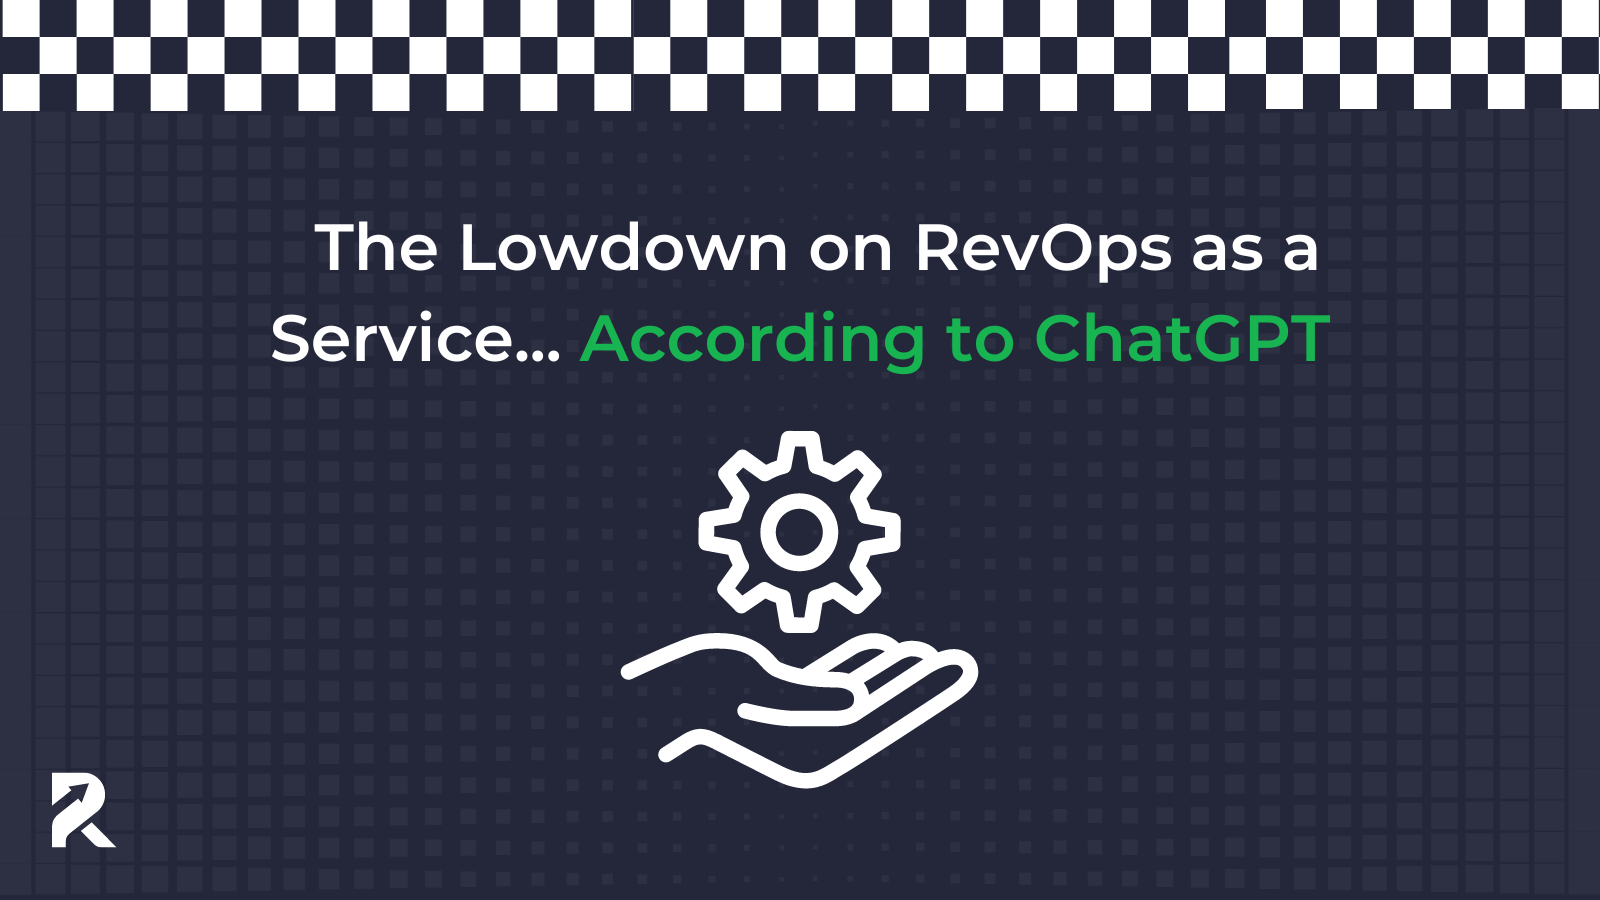 The Lowdown on RevOps as a Service... According to ChatGPT